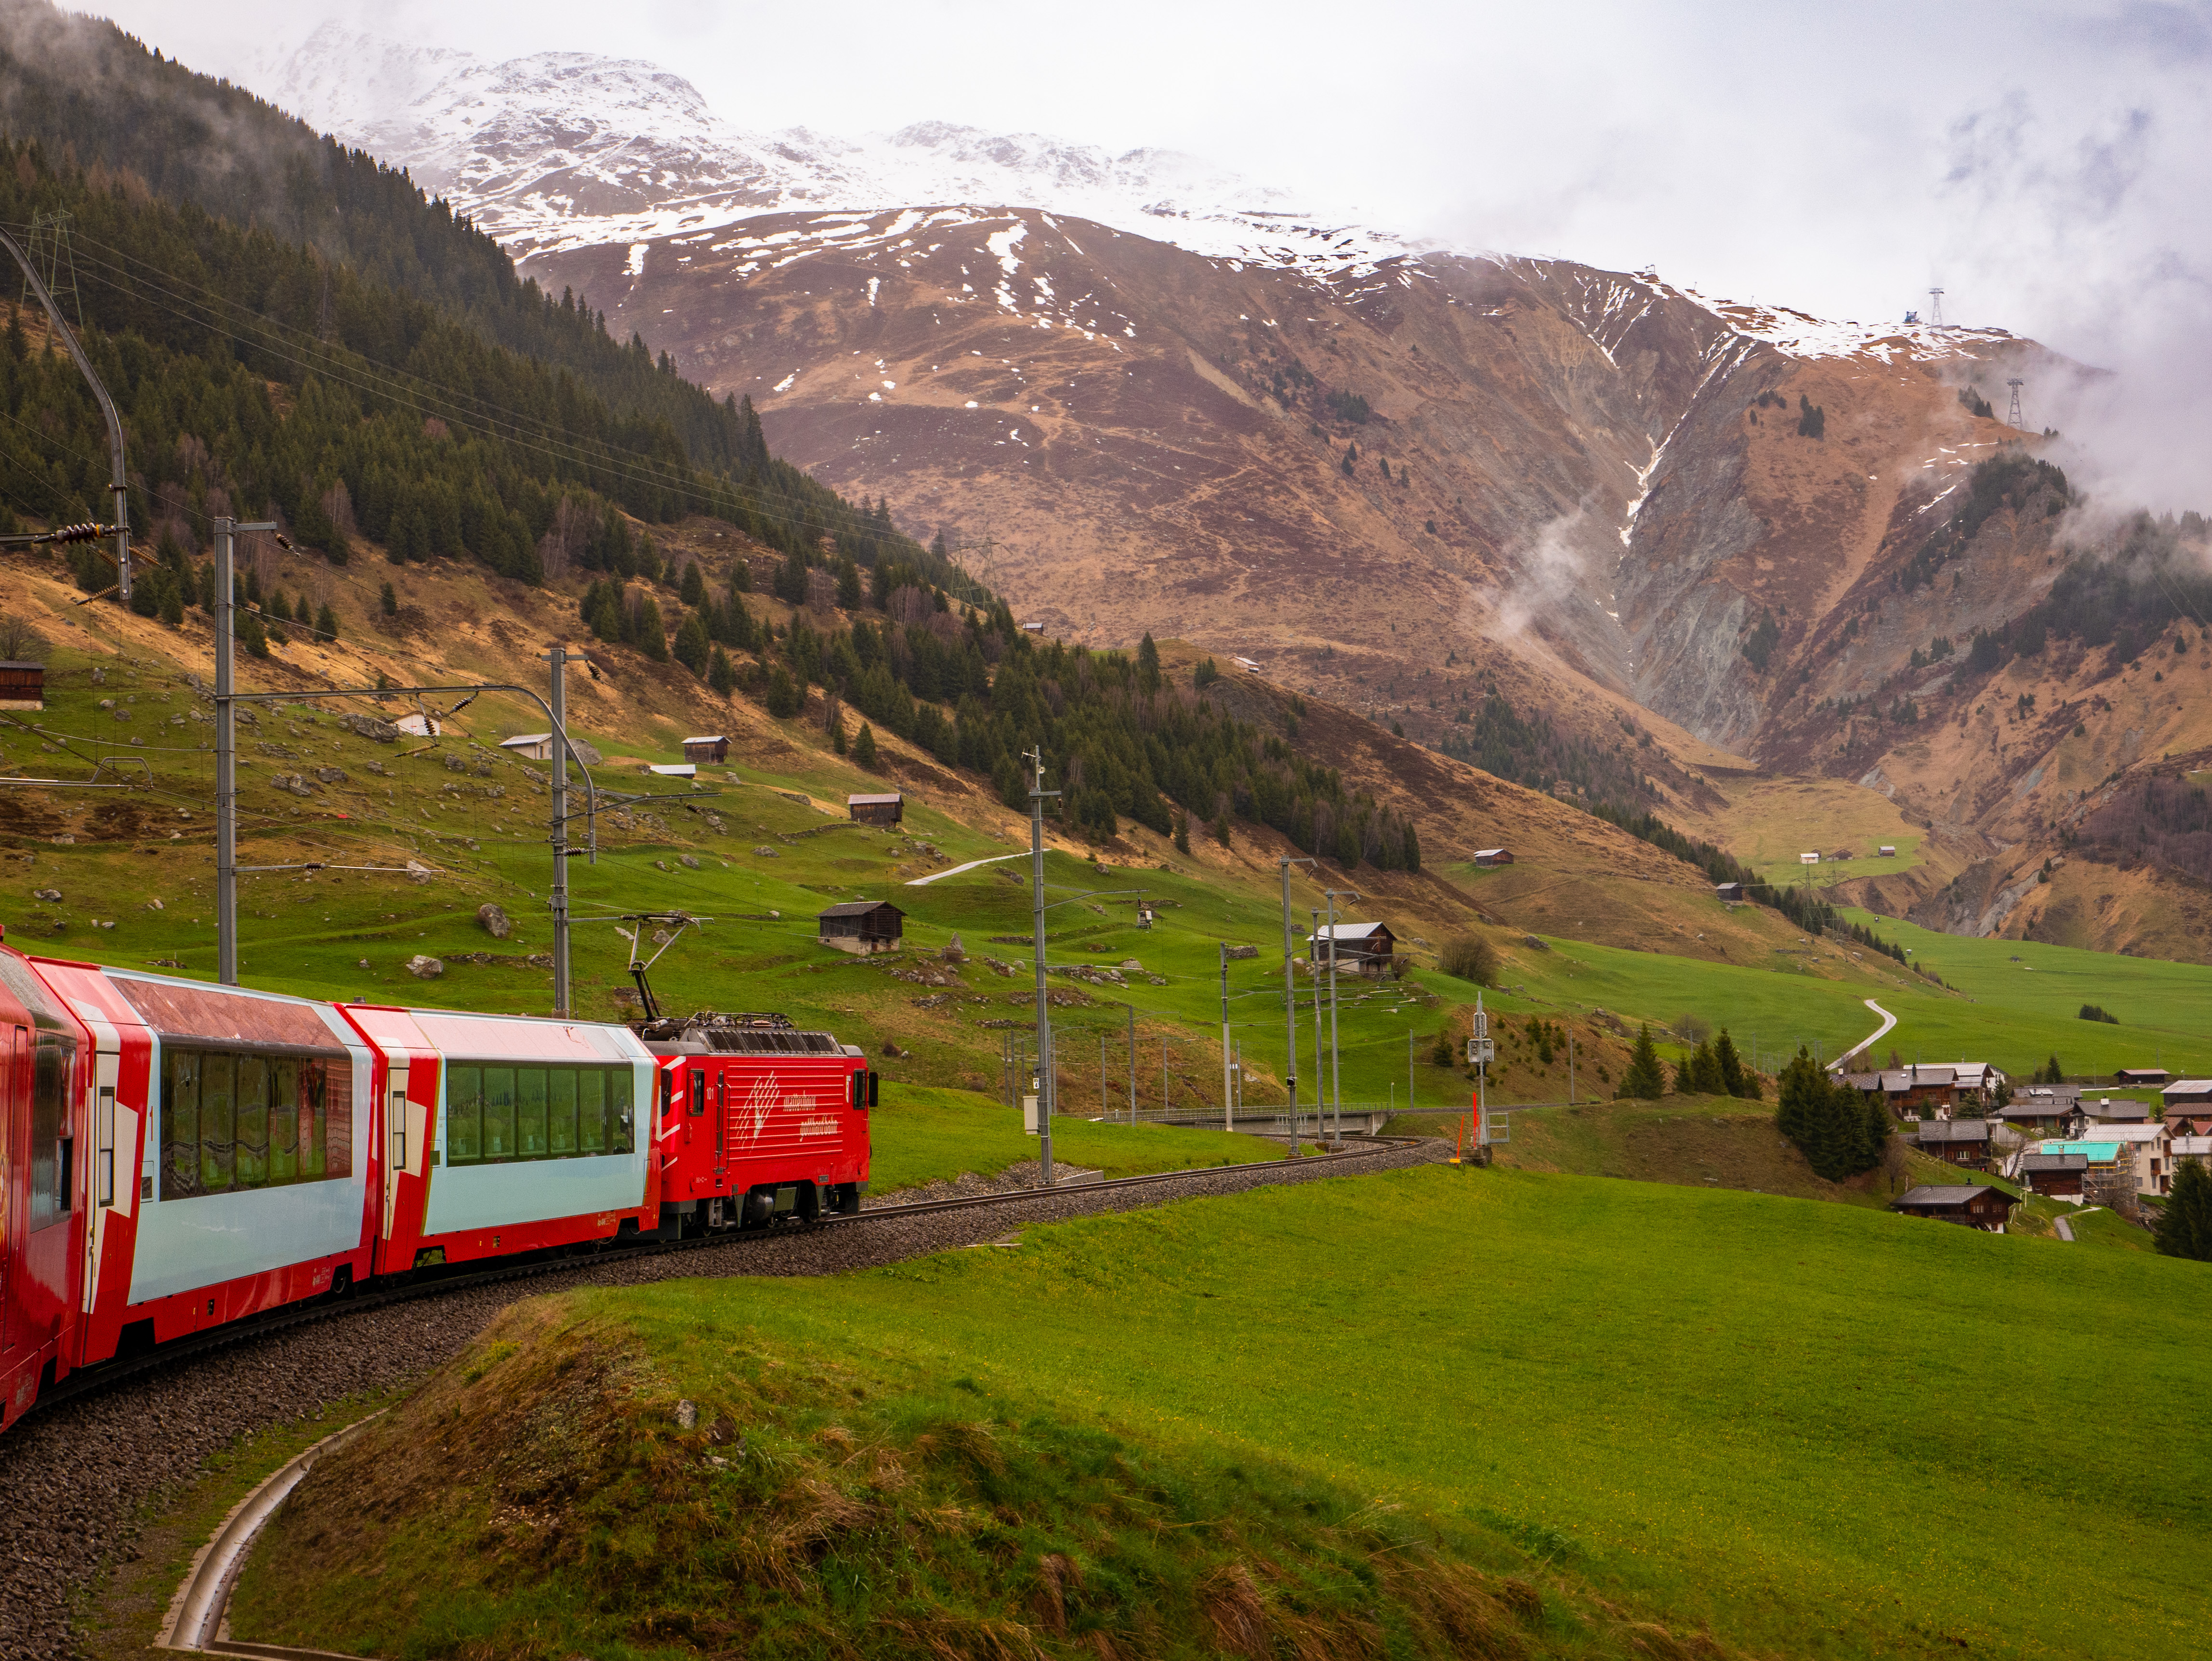 Glacier Express panoramic train travelling through the Swiss countryside